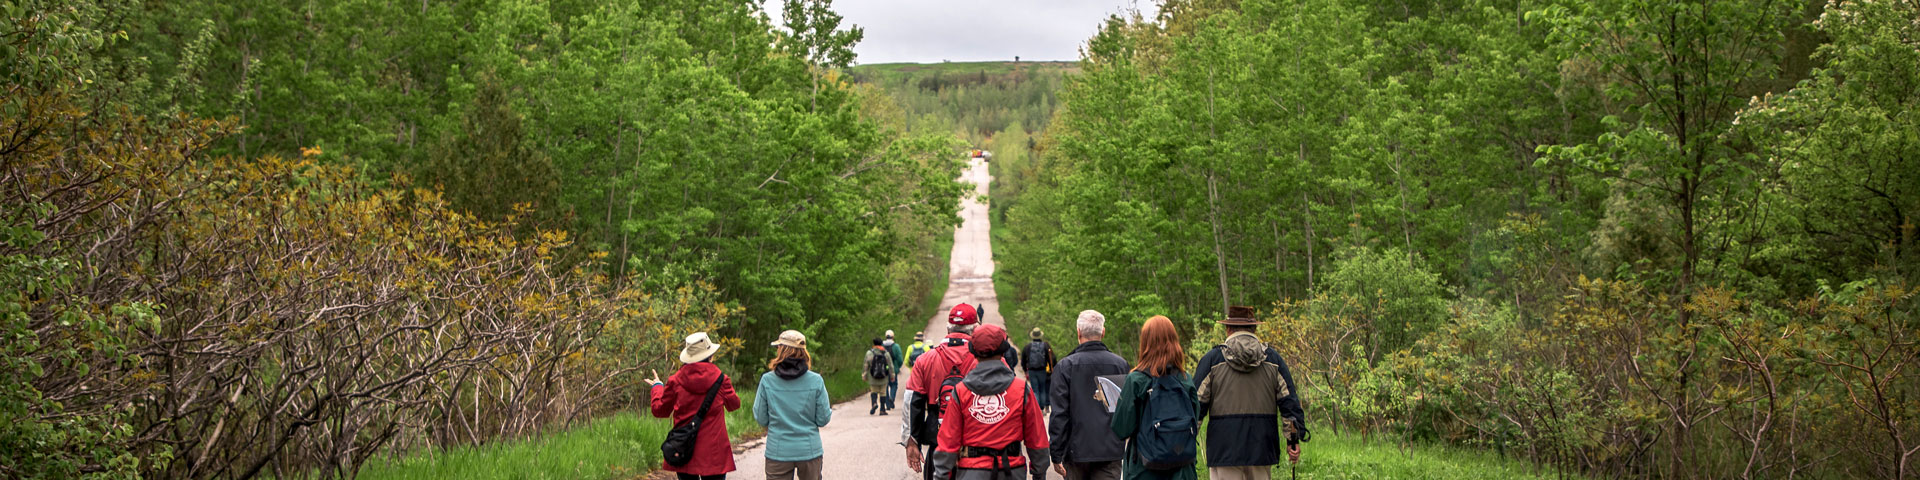 Guided walk participants hike trail with lush green forest